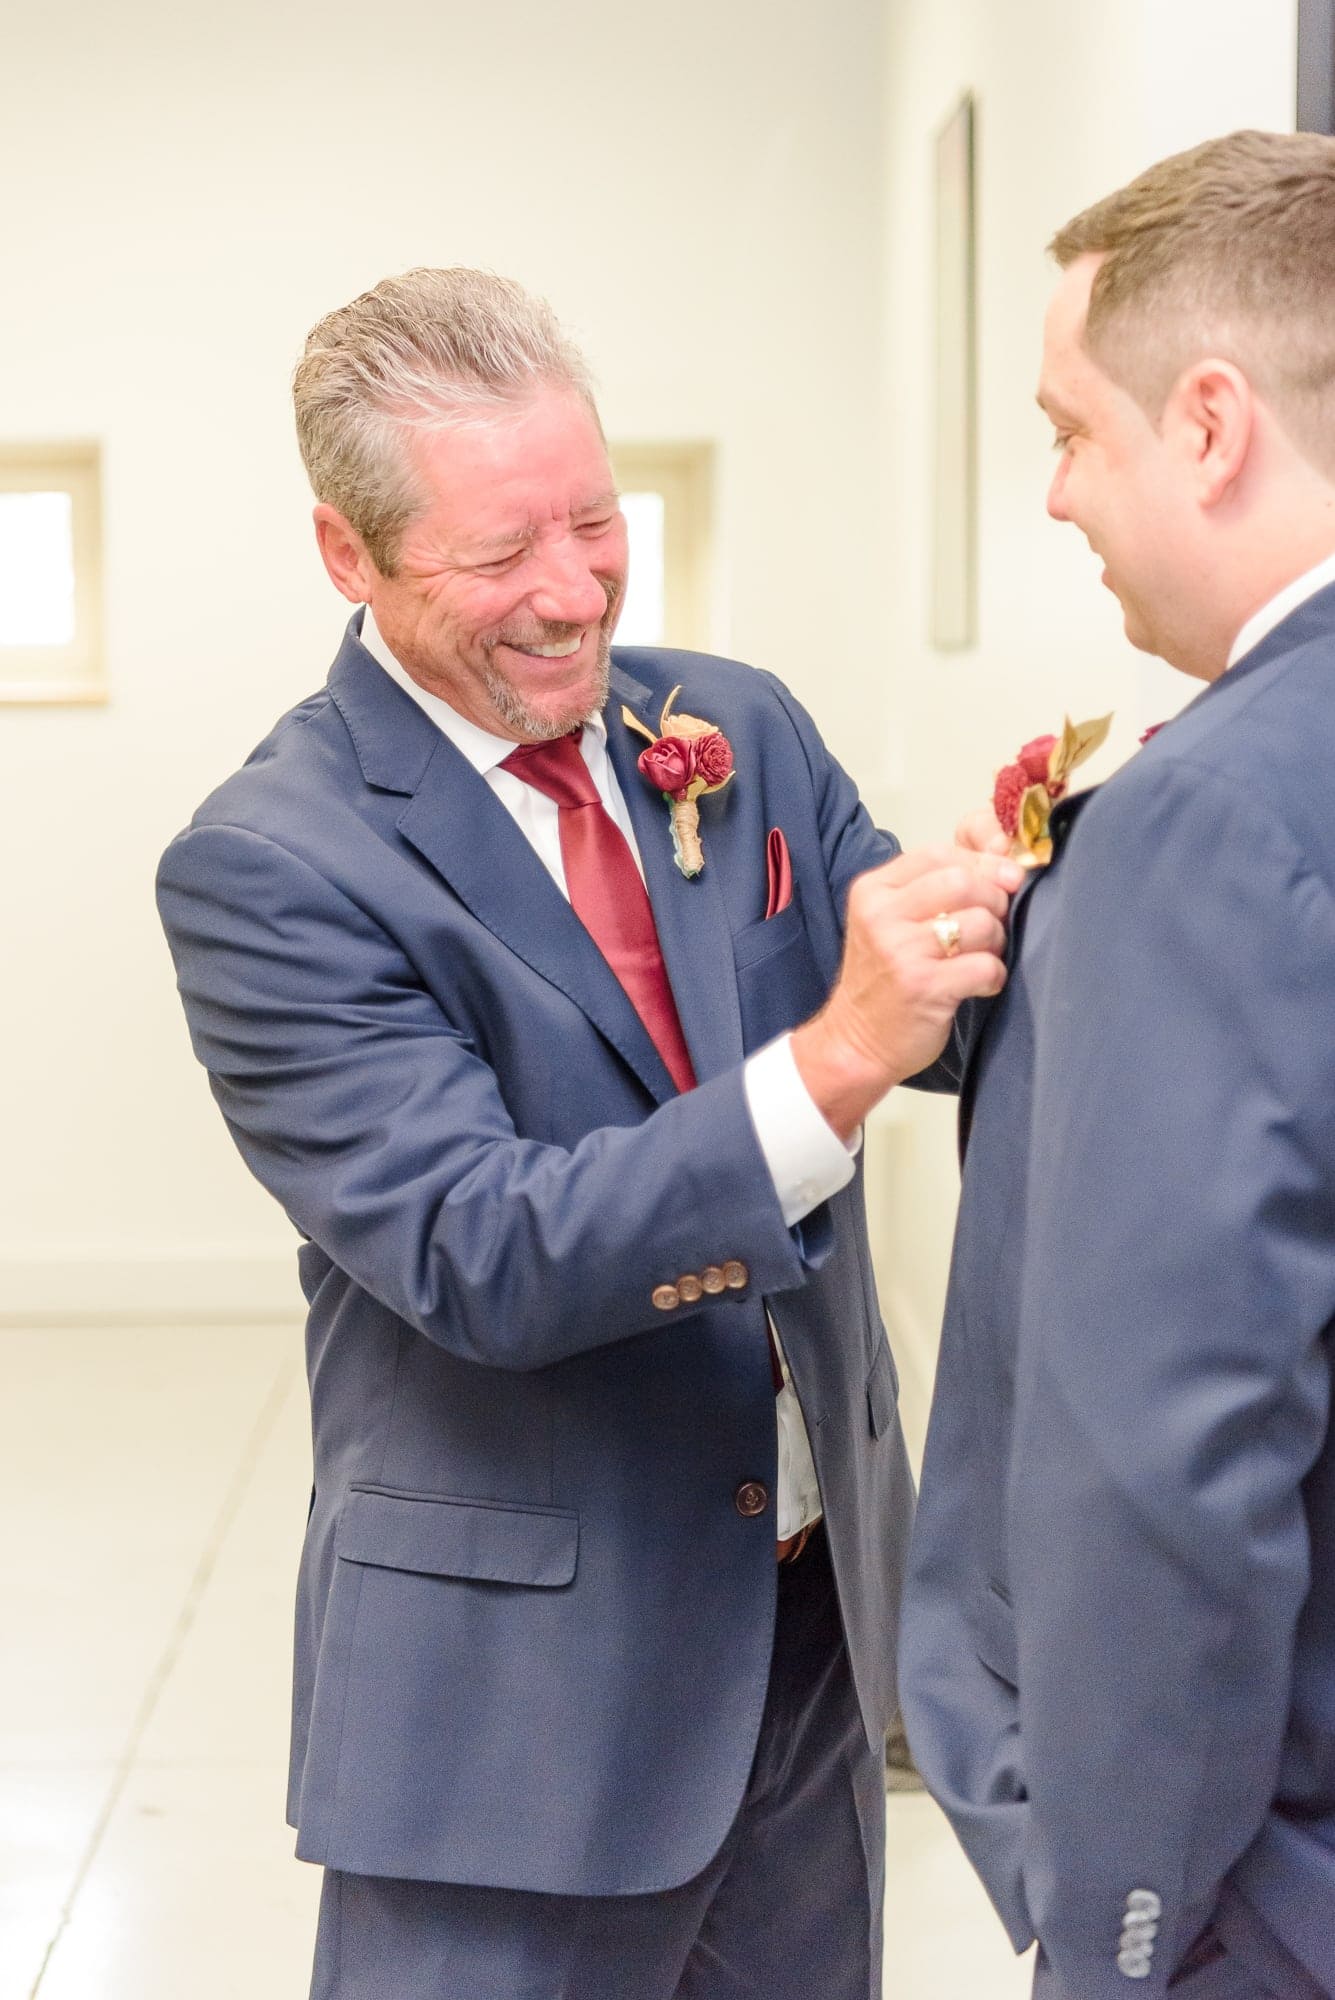 Jeff's dad helps him with his jacket in the groom's room of the Charles Mack Citizen Center.